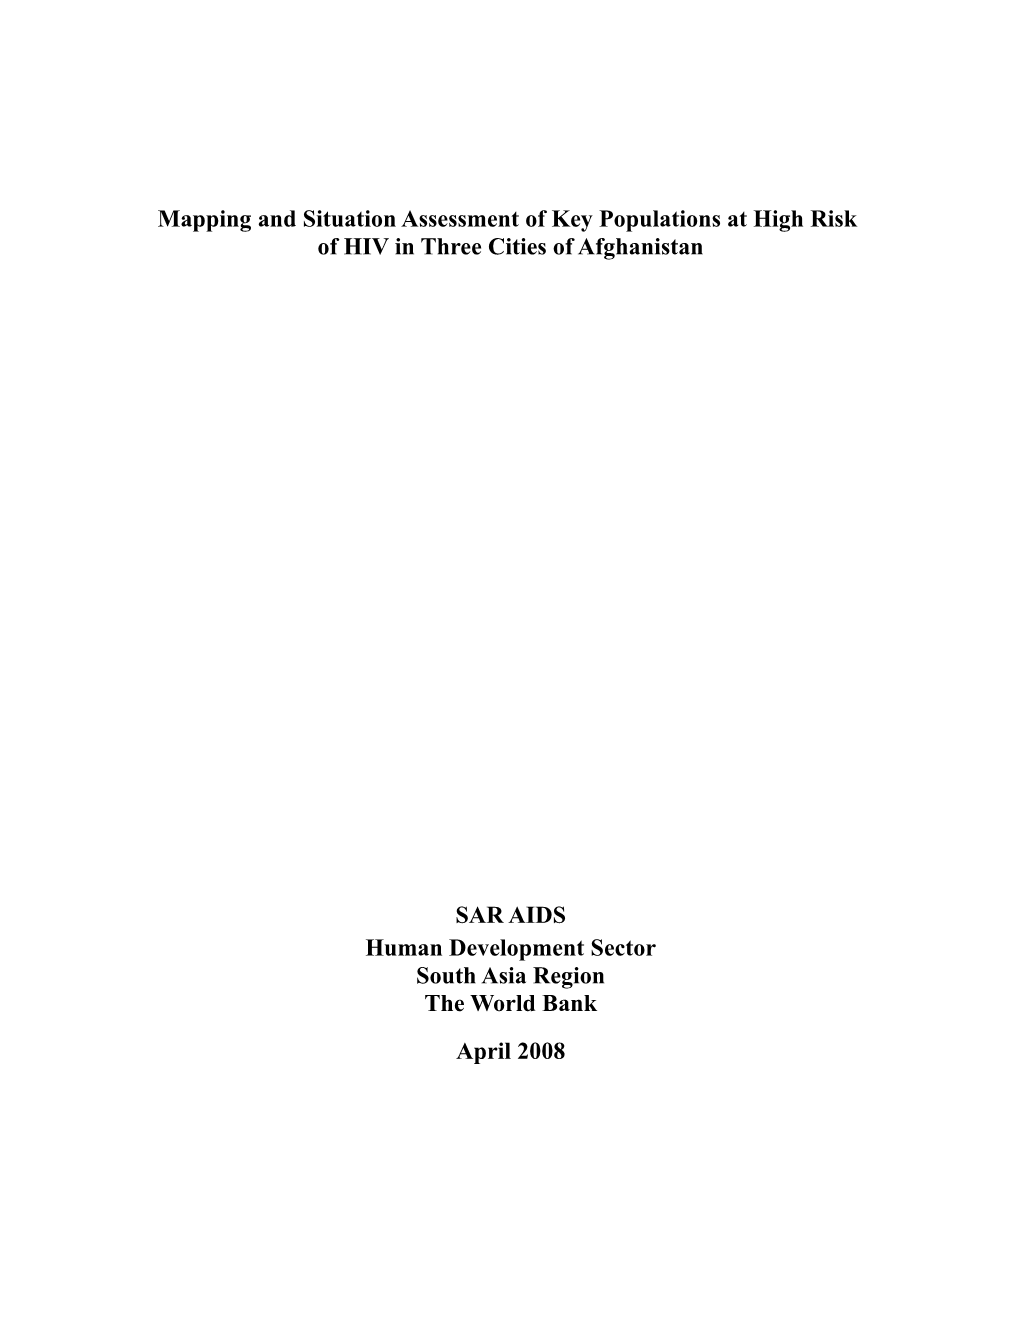 AFGHAN-Map Situation Assessment and Social Mapping of High Risk Groups for HIV Infection